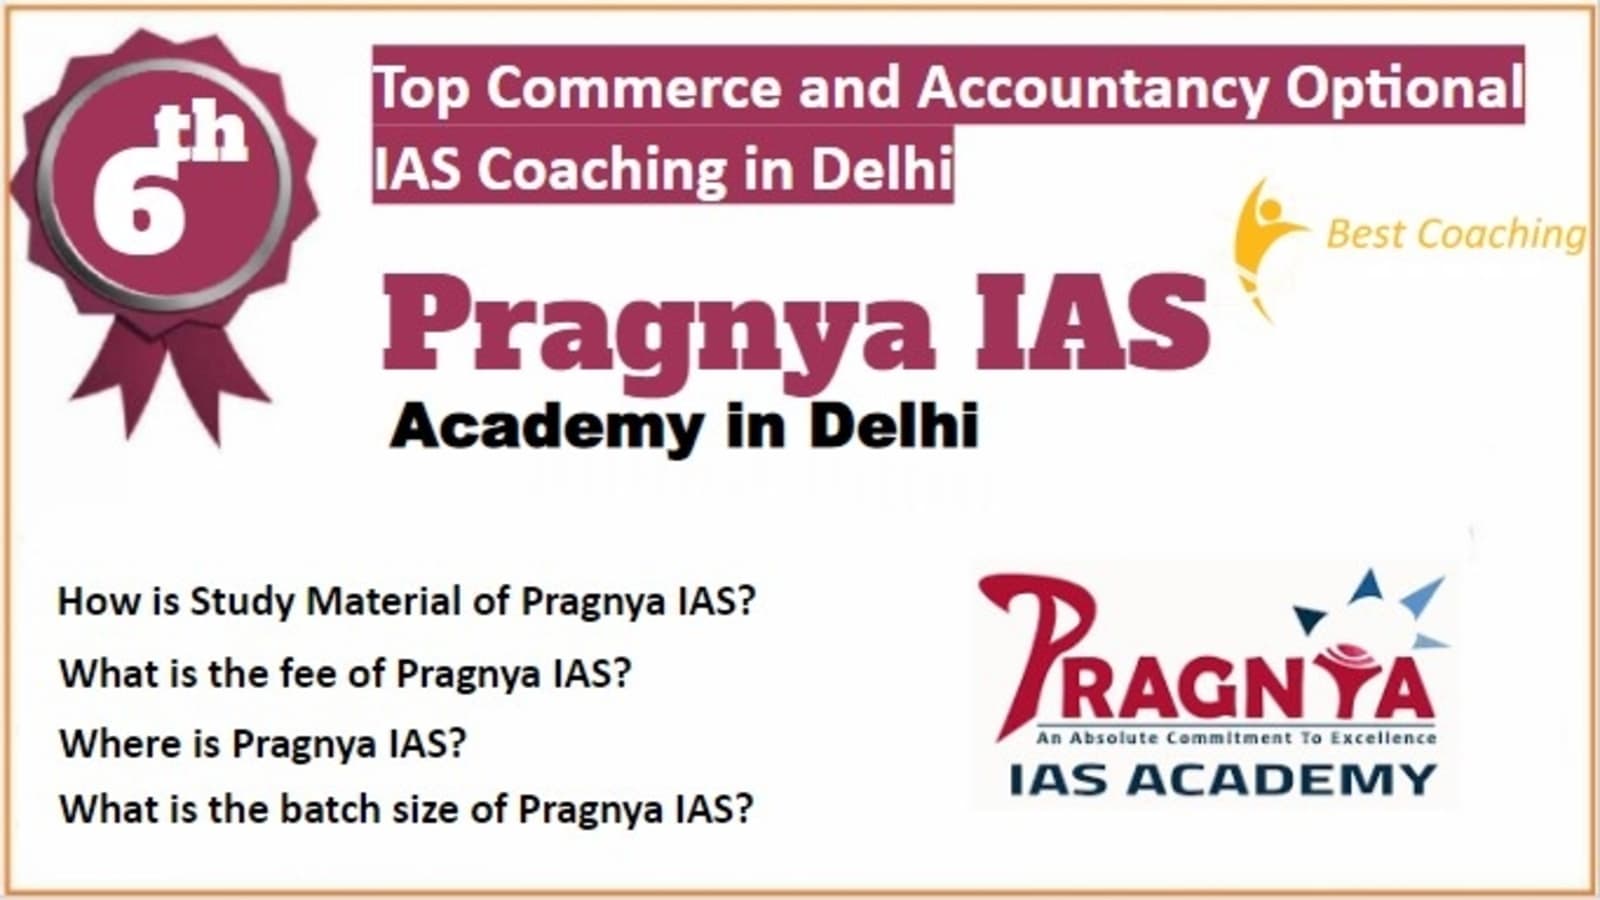 Rank 6 Best Commerce and Accountancy Optional IAS Coaching in Delhi